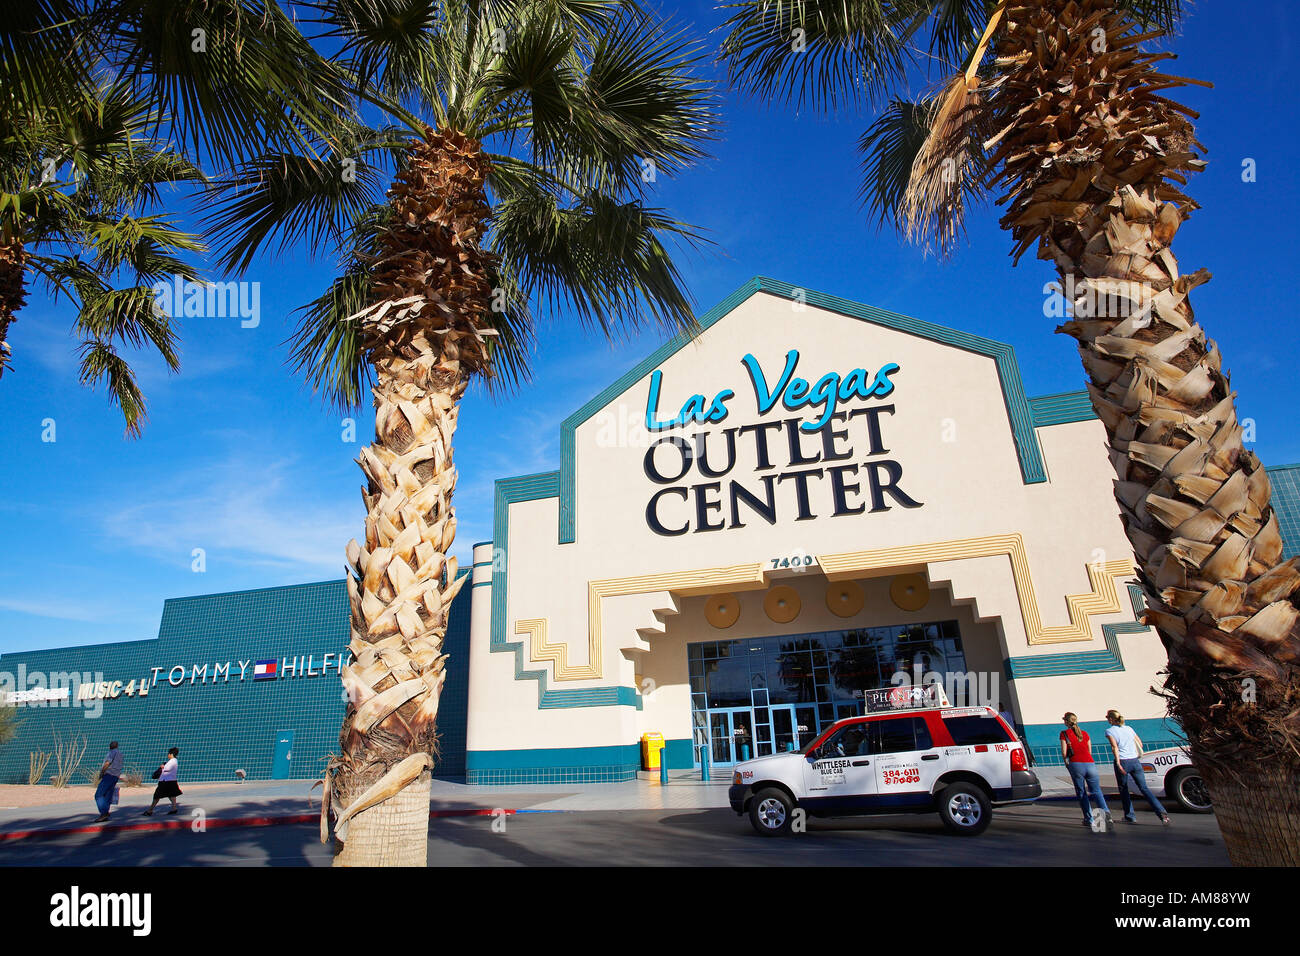 United States, Nevada, Las Vegas, Outlet Center, shopping mall and Stock Photo - Alamy